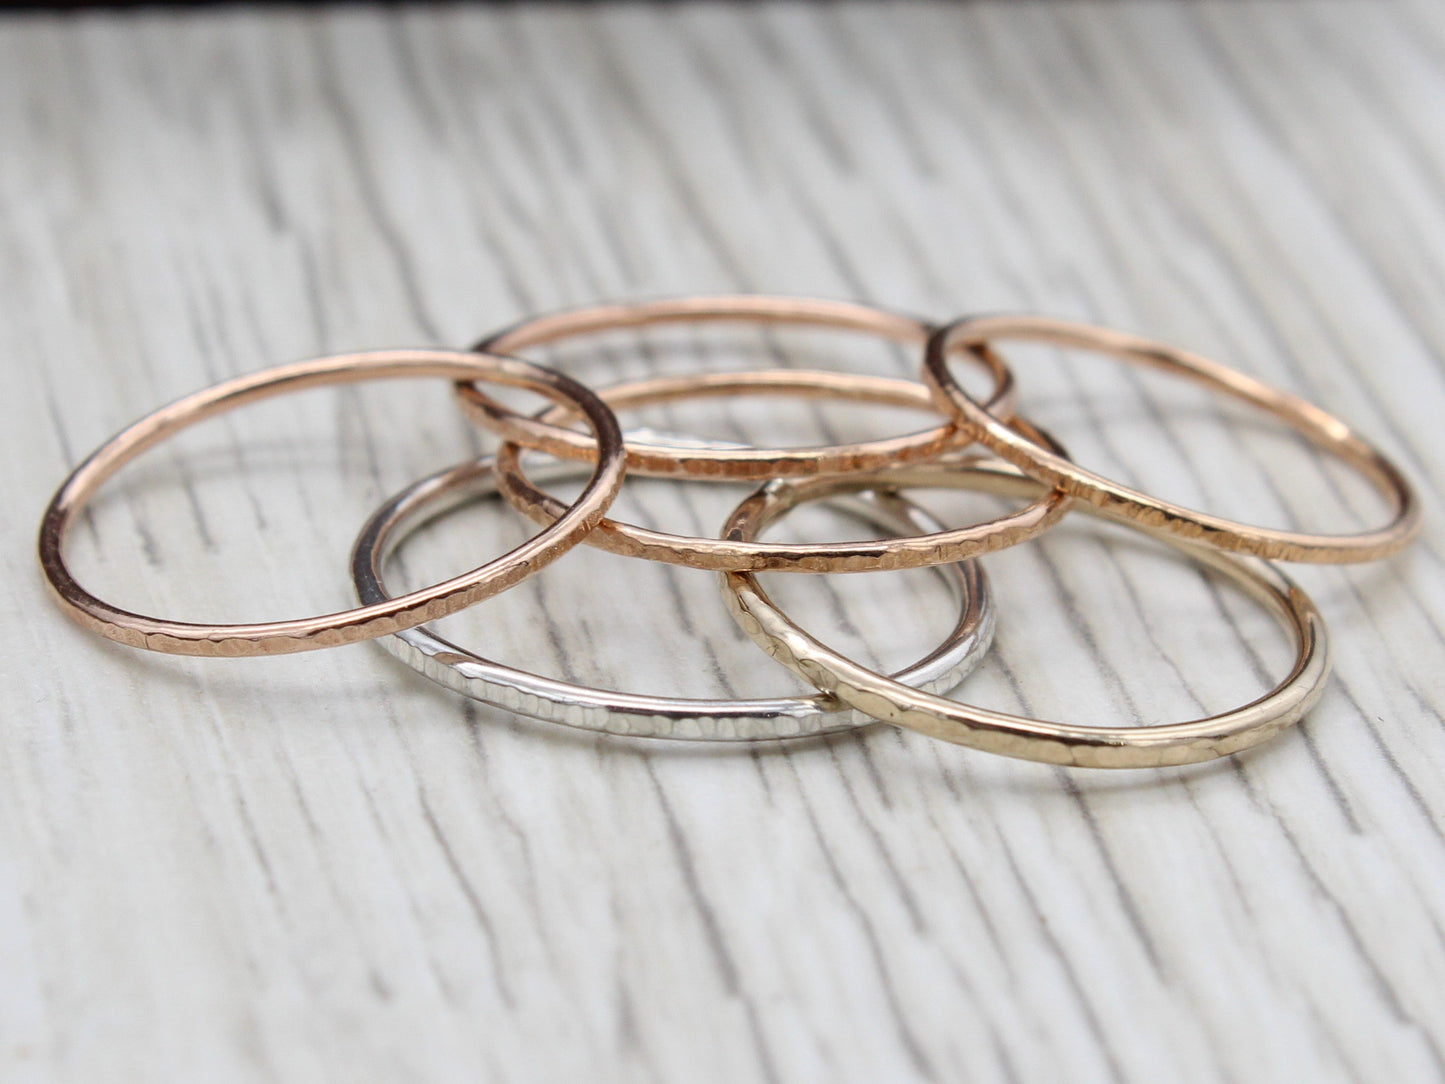 Skinny Stack Ring - Silver, Gold or Pink Gold - Sizes 9.5-13